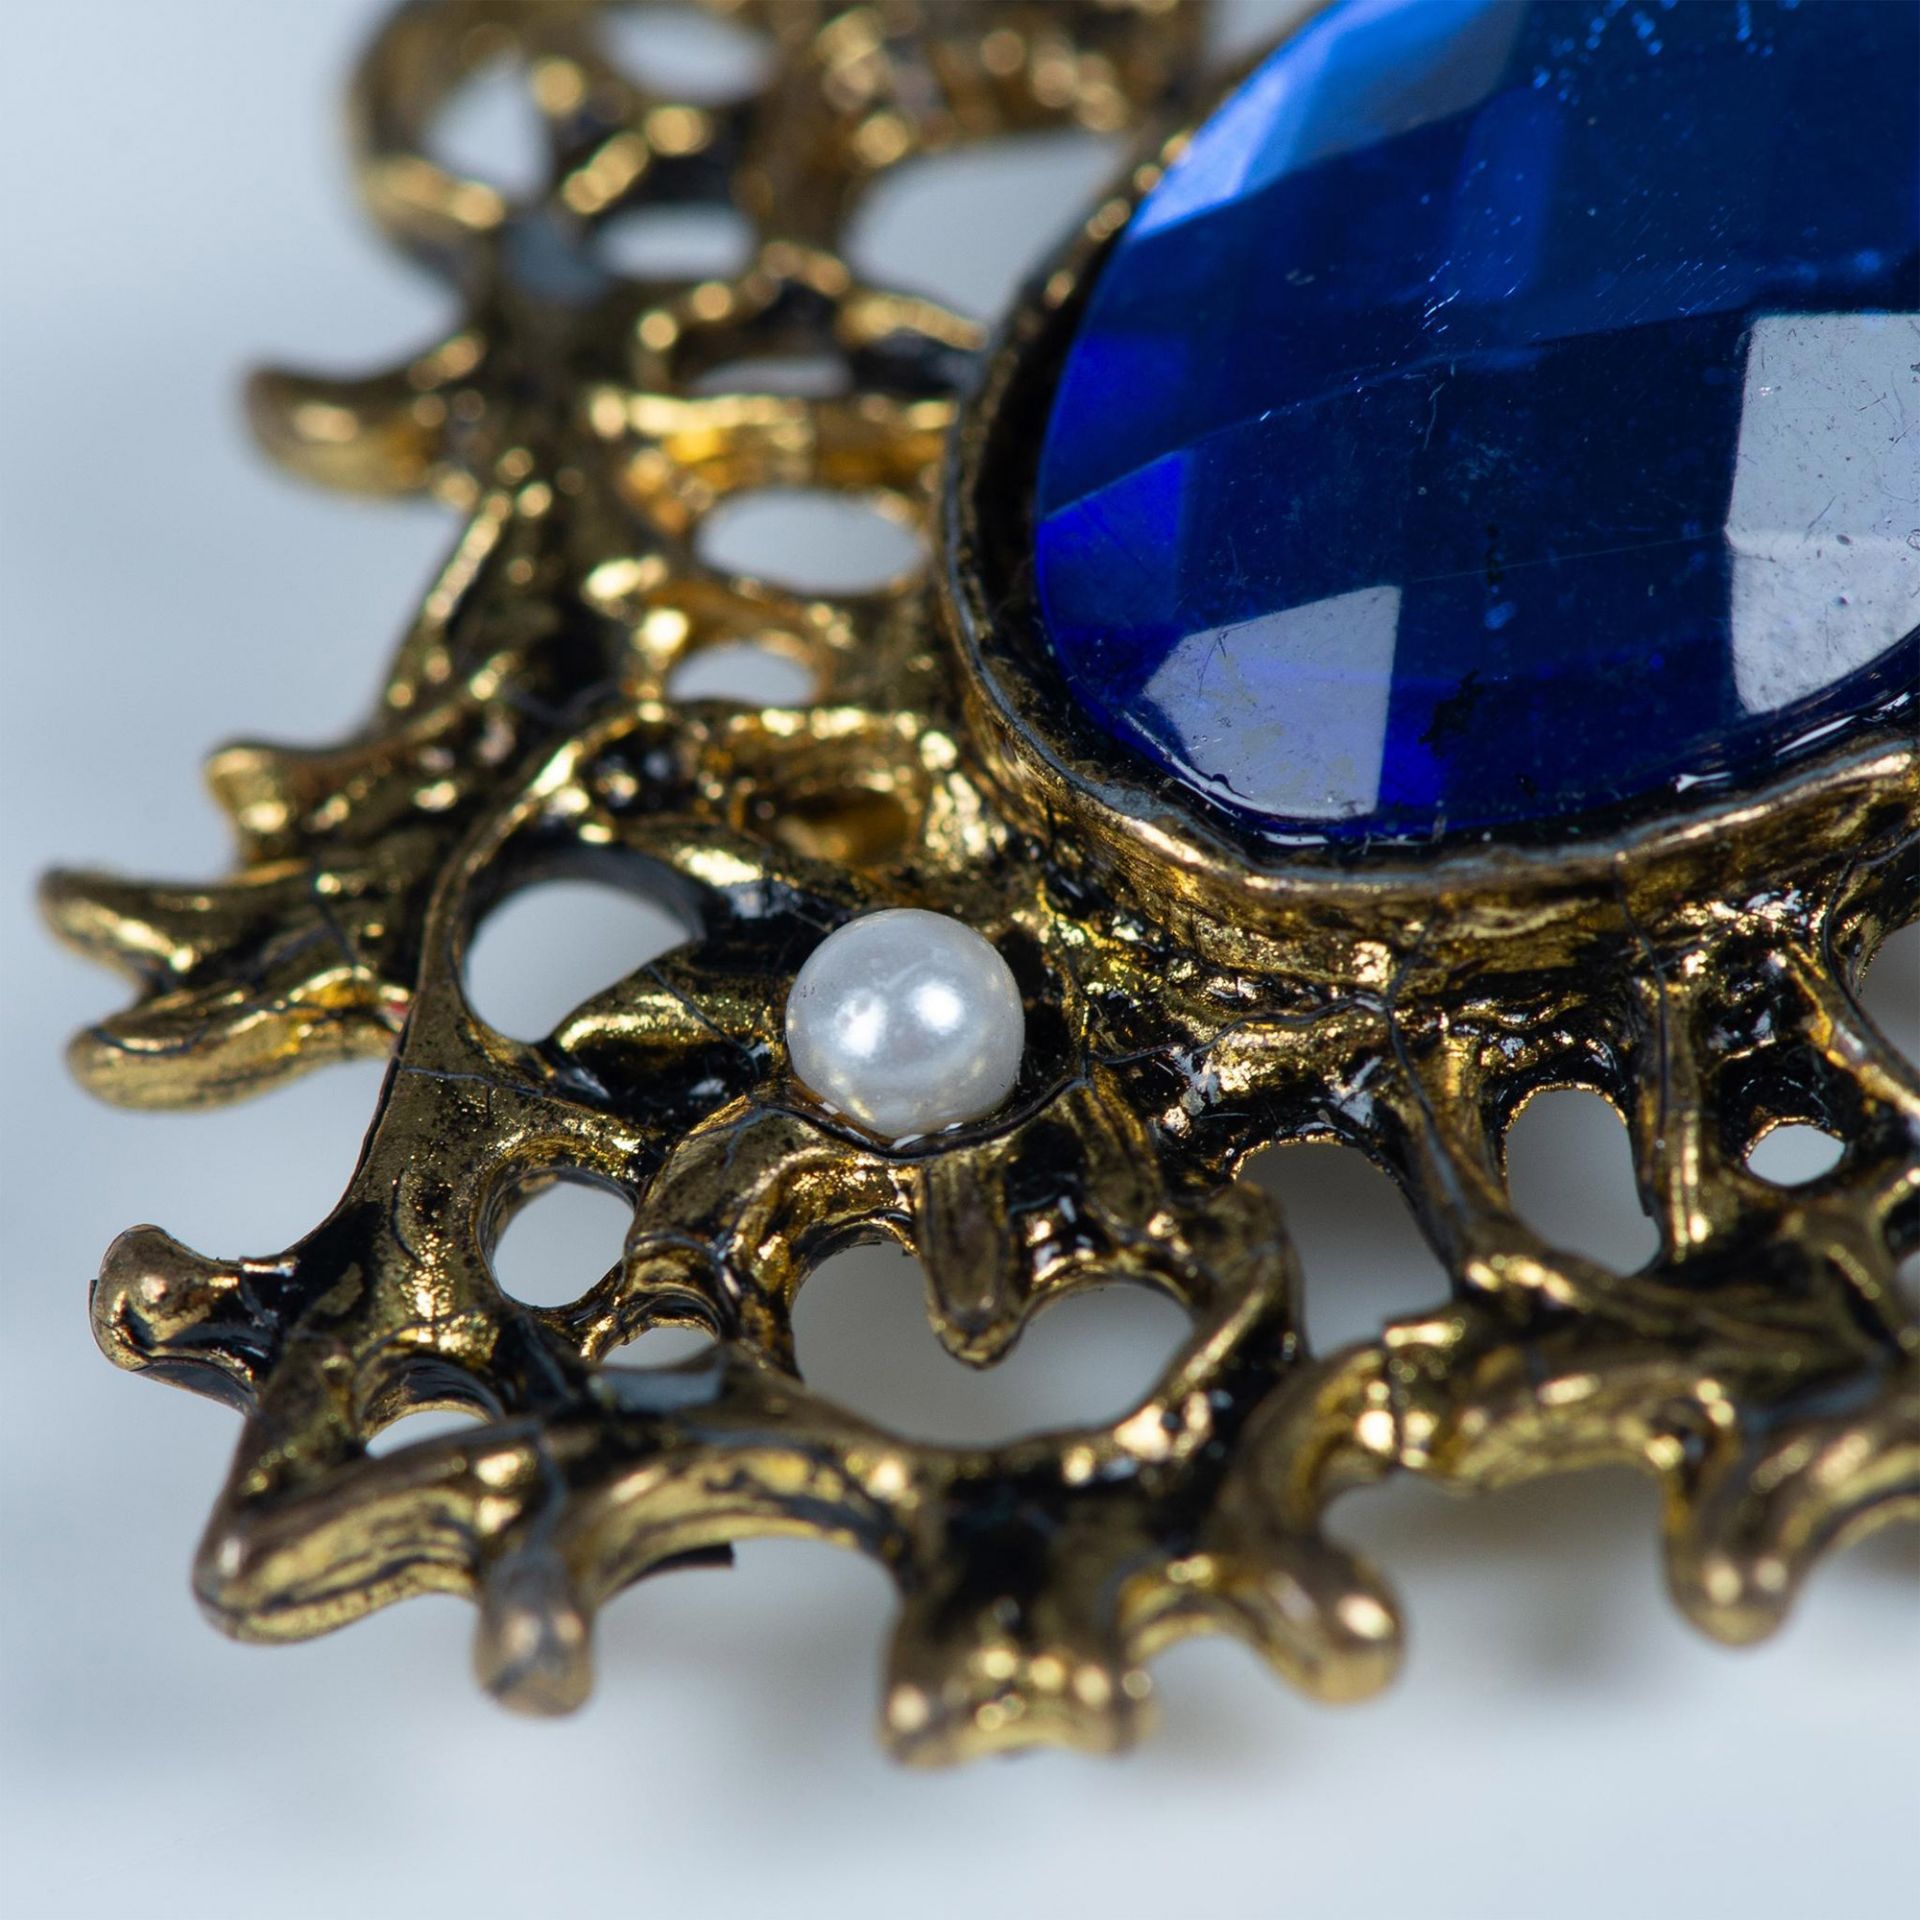 Ornate Gold Metal, Faux Pearl and Blue Rhinestone Brooch - Image 4 of 5